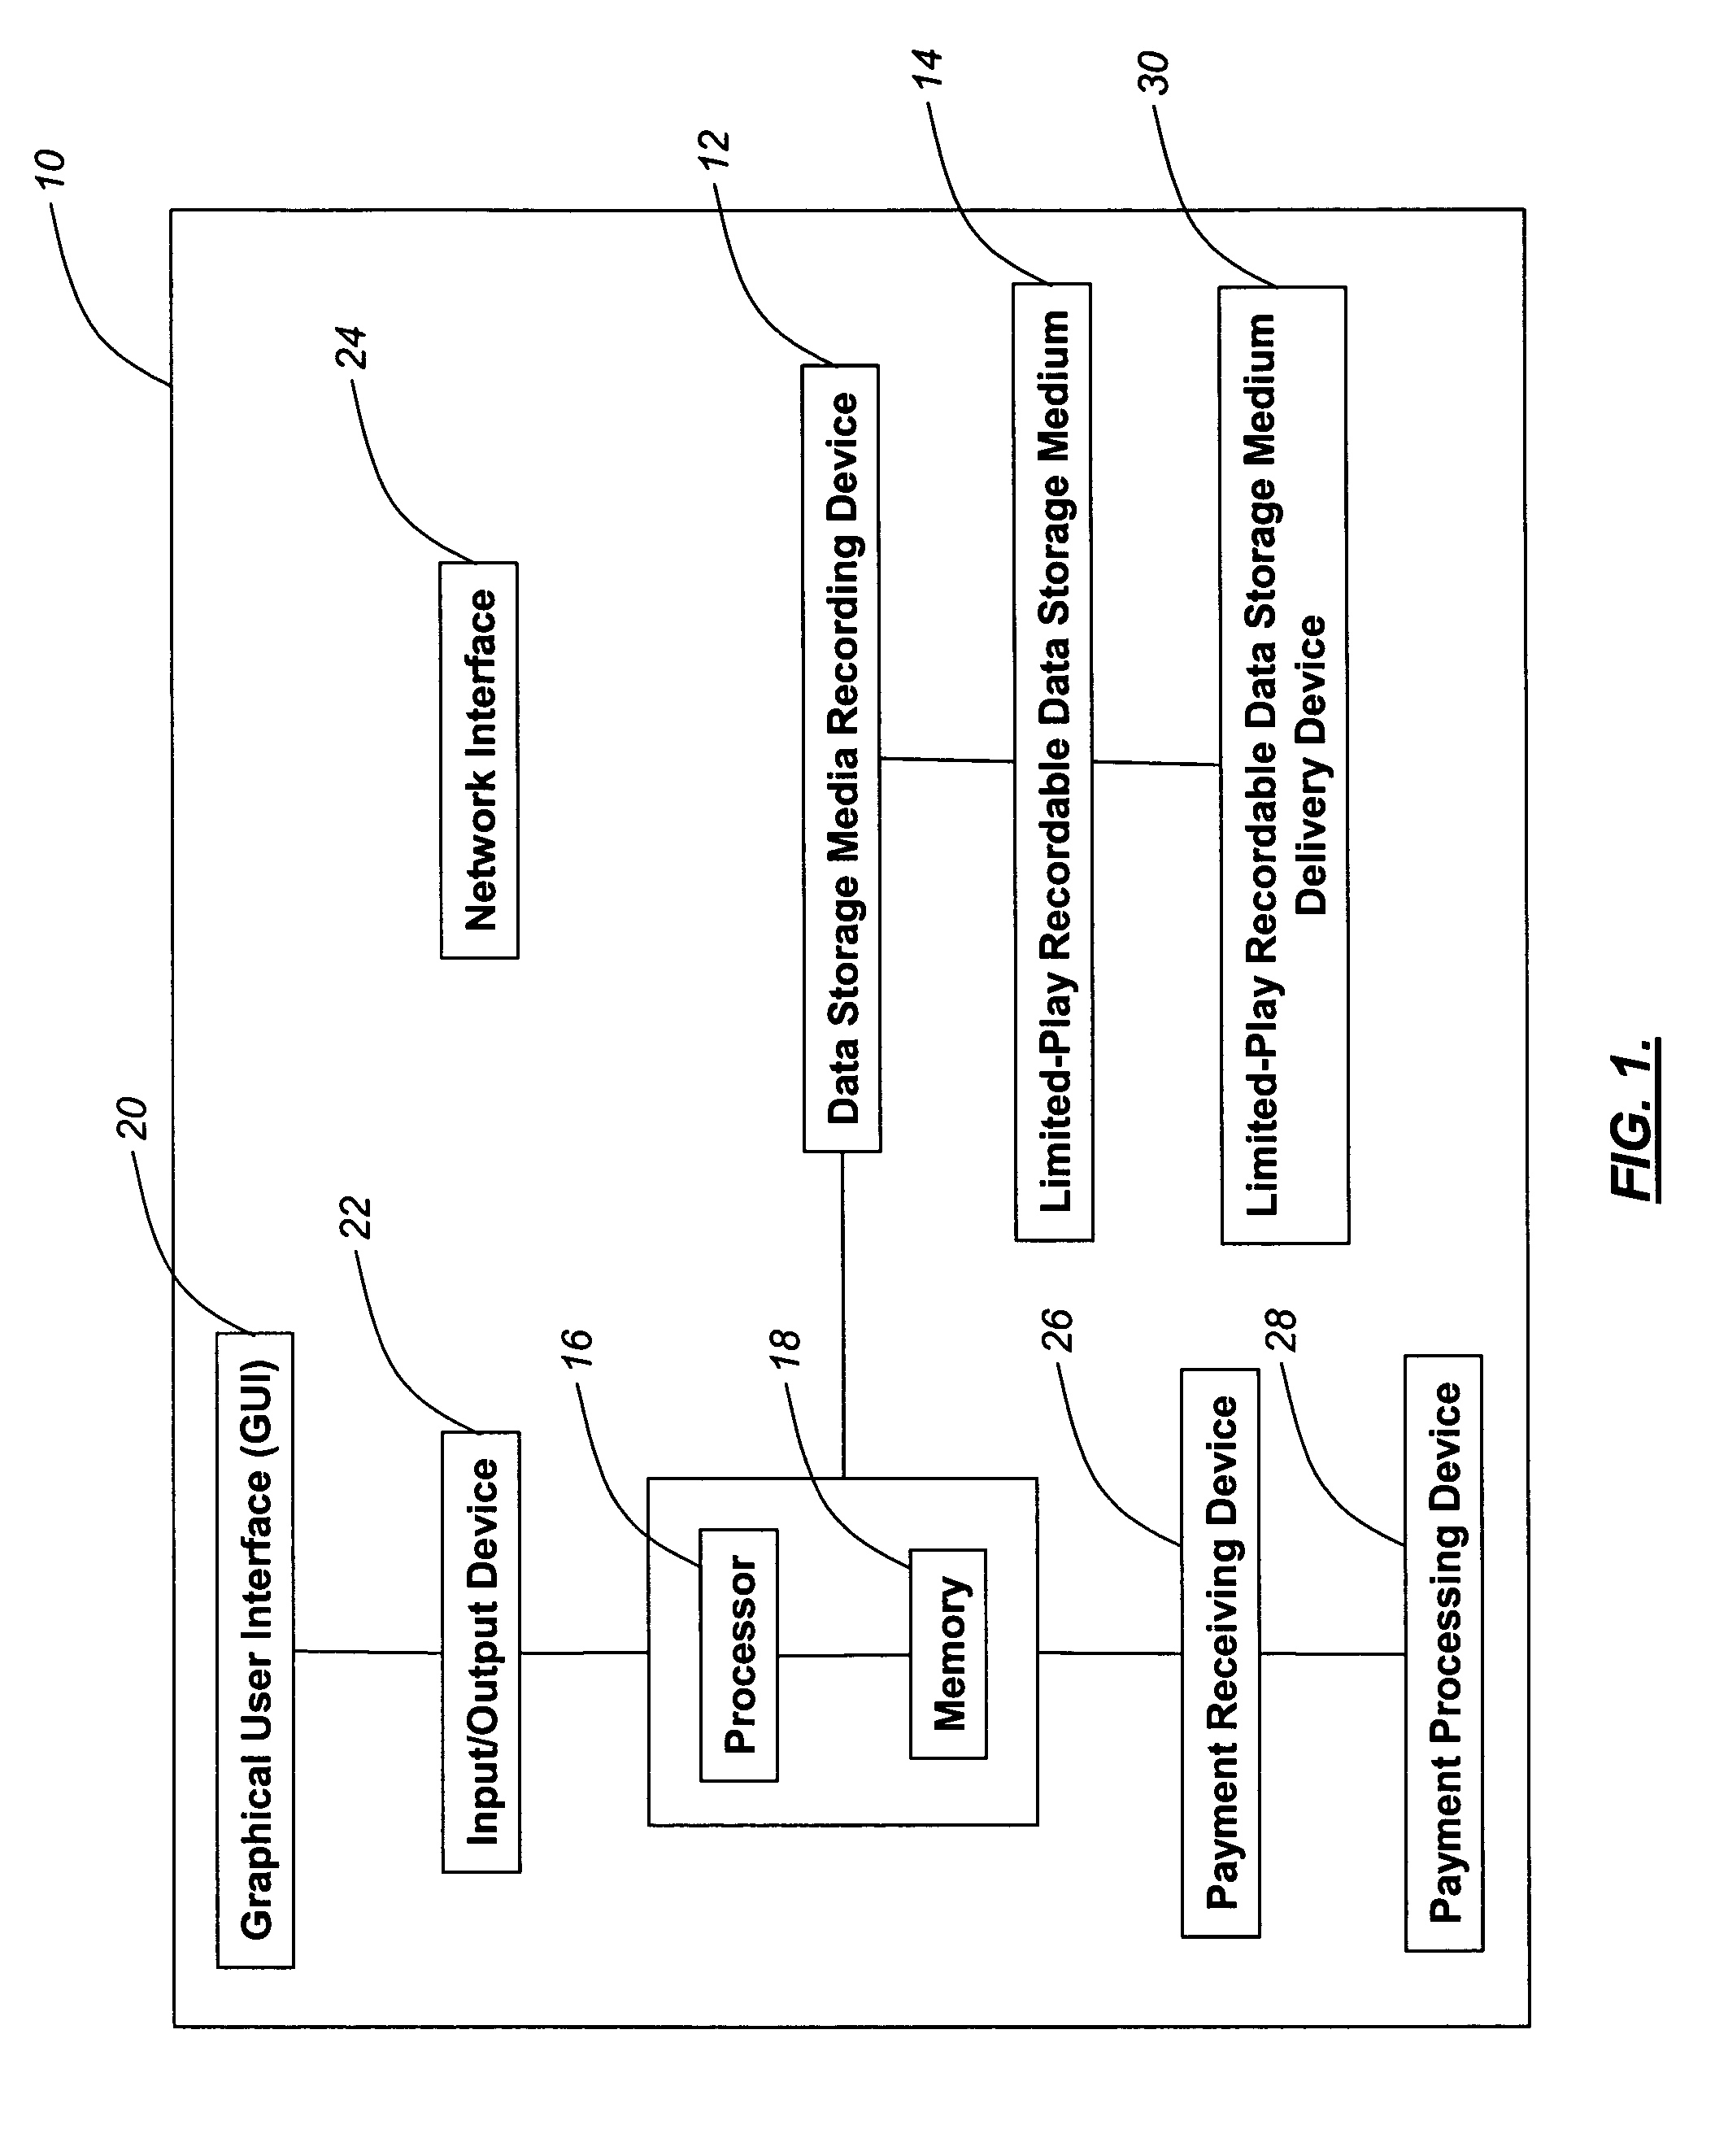 Limited-play recordable data storage media and associated methods of manufacture